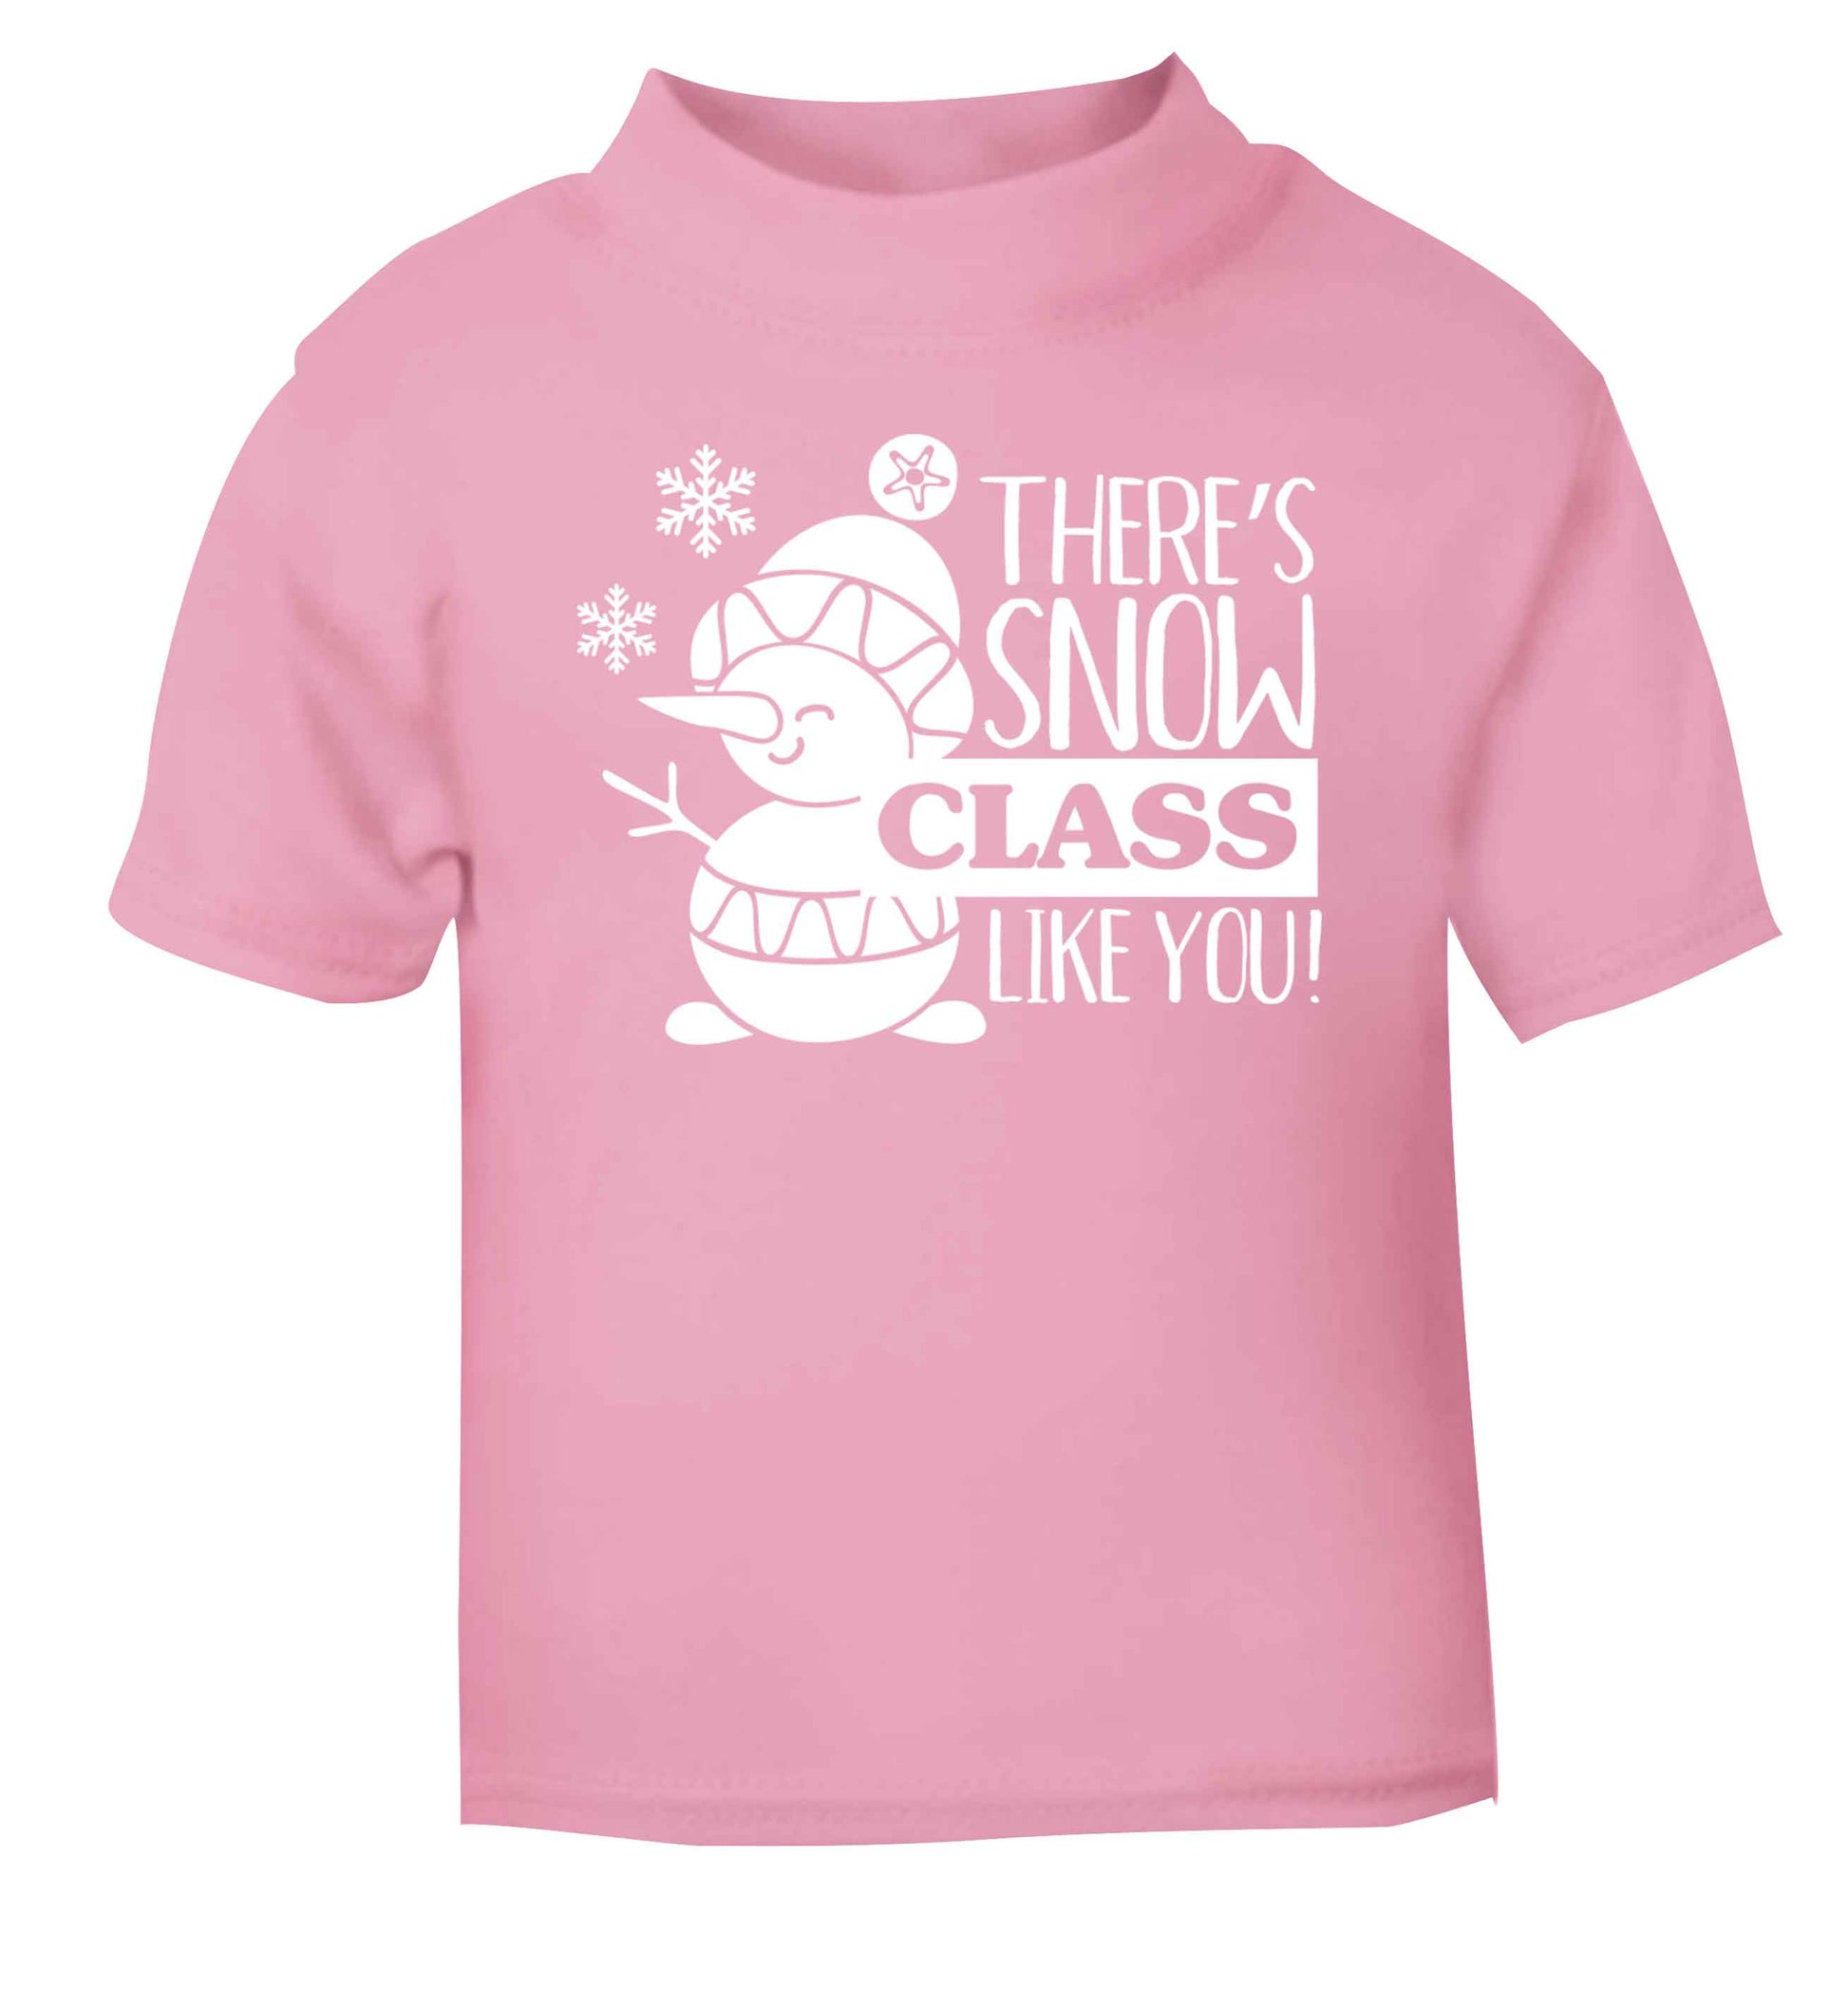 There's snow class like you light pink baby toddler Tshirt 2 Years